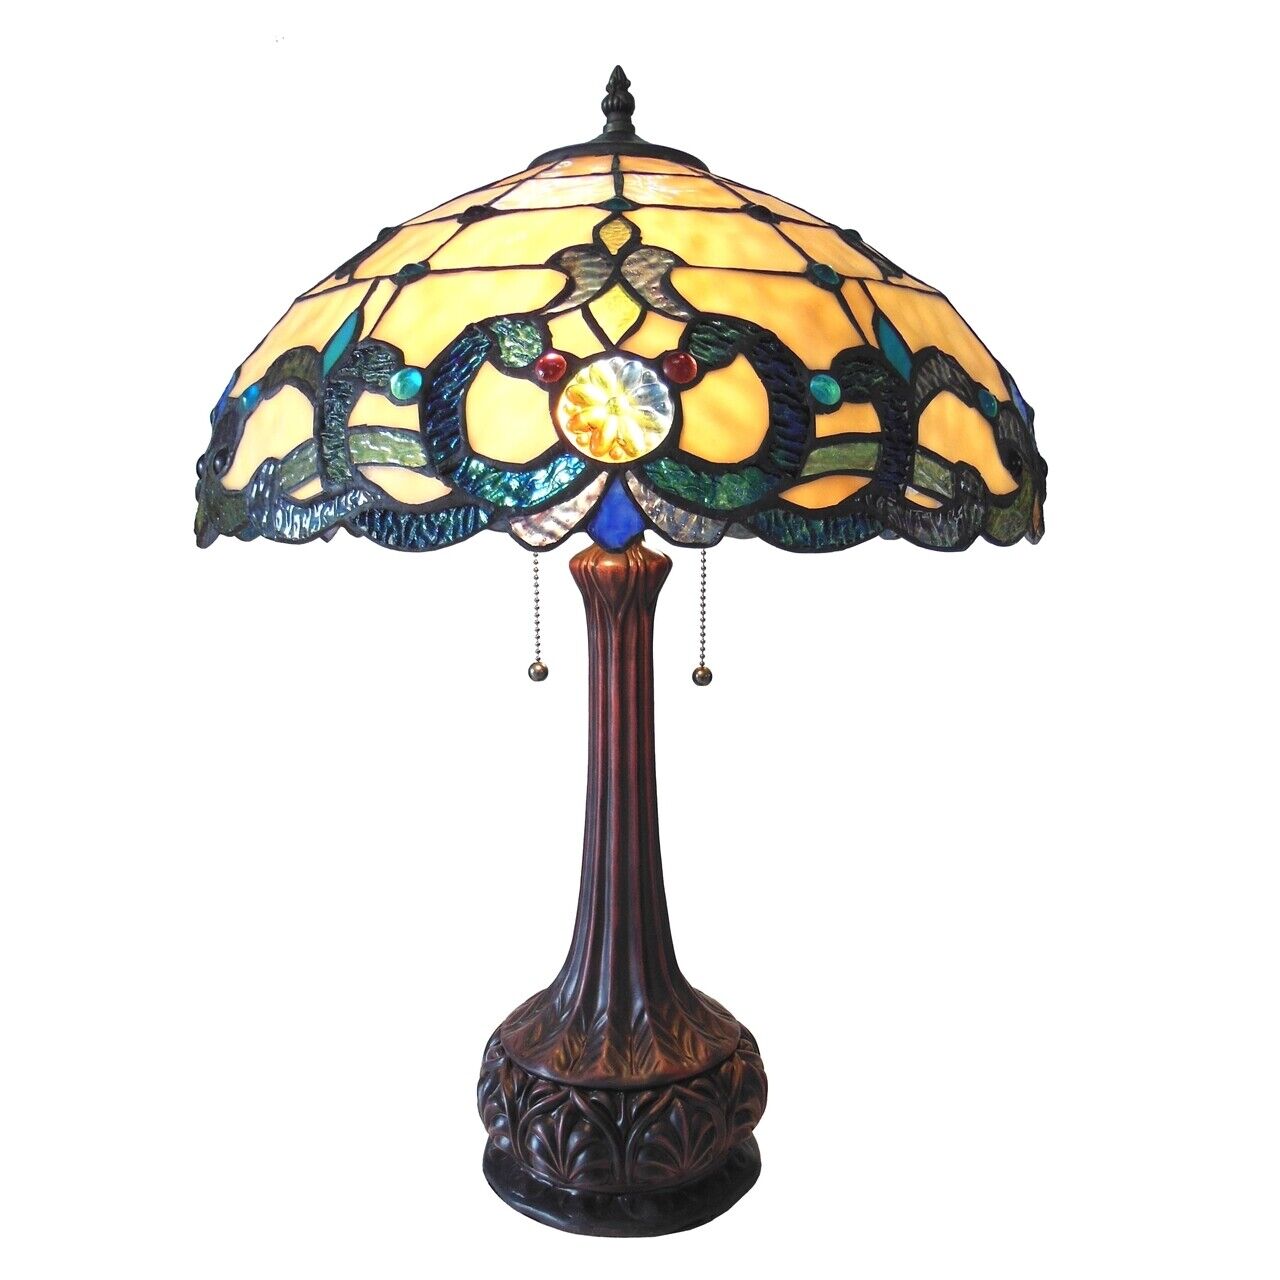 25" Antique Vintage Style Stained Glass Table Lamp